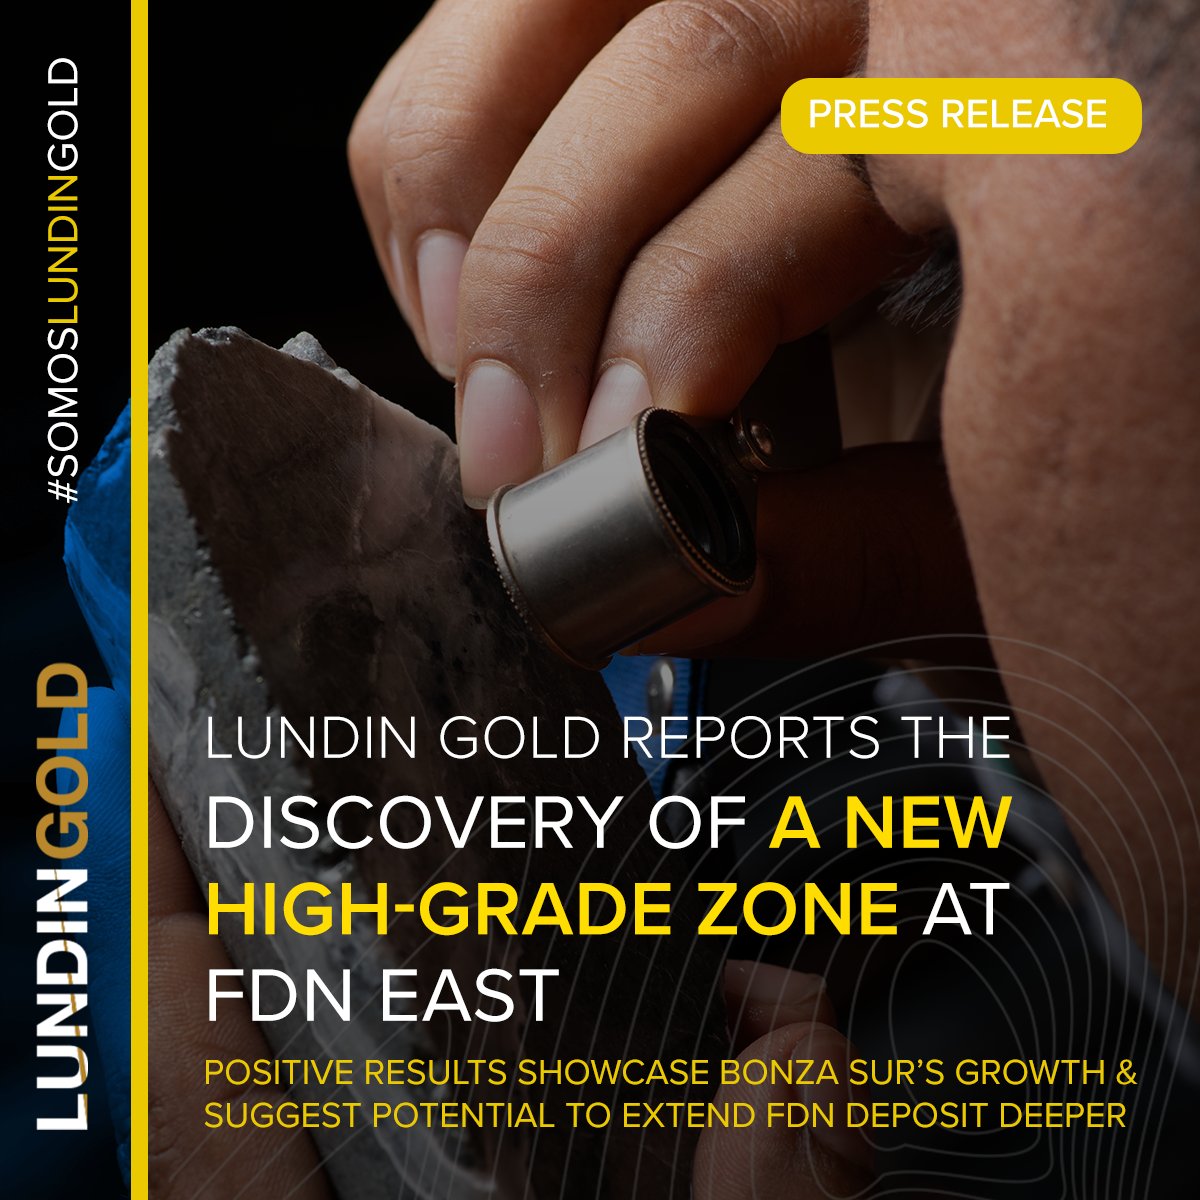 $LUG's ongoing 2024 exploration program has discovered a new high-grade zone at FDN East, is enabling continued growth at Bonza Sur, and indicates the potential to extend FDN at depth. Importantly, positive results for both the near-mine and conversion drilling programs support…